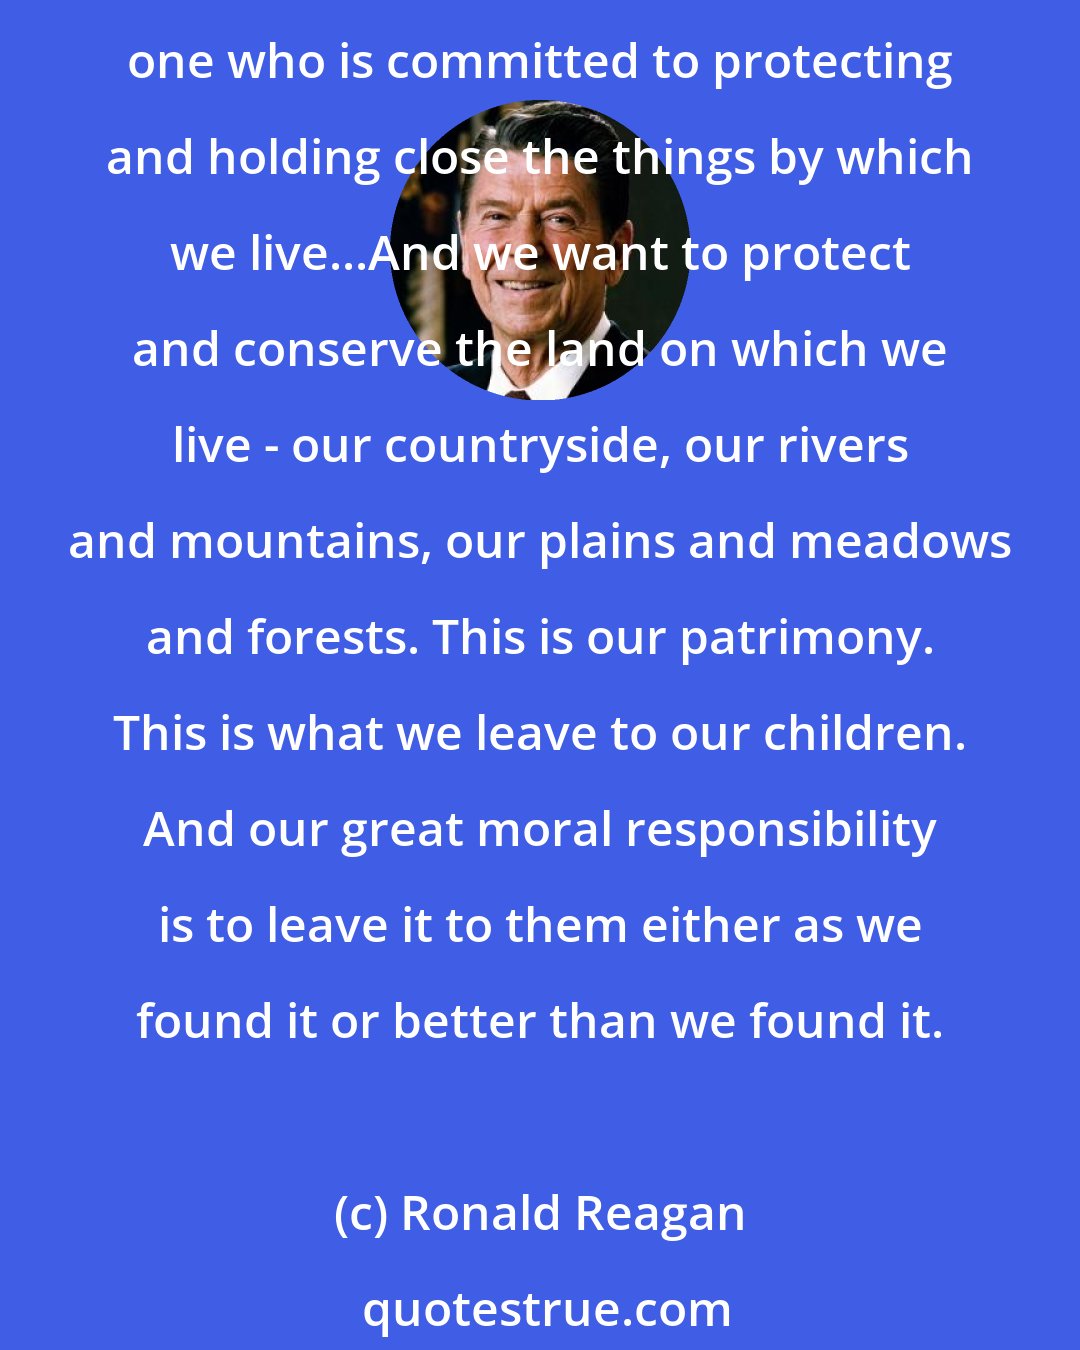 Ronald Reagan: You are worried about what man has done and is doing to this magical planet that God gave us. And I share your concern. What is a conservative after all but one who conserves, one who is committed to protecting and holding close the things by which we live...And we want to protect and conserve the land on which we live - our countryside, our rivers and mountains, our plains and meadows and forests. This is our patrimony. This is what we leave to our children. And our great moral responsibility is to leave it to them either as we found it or better than we found it.